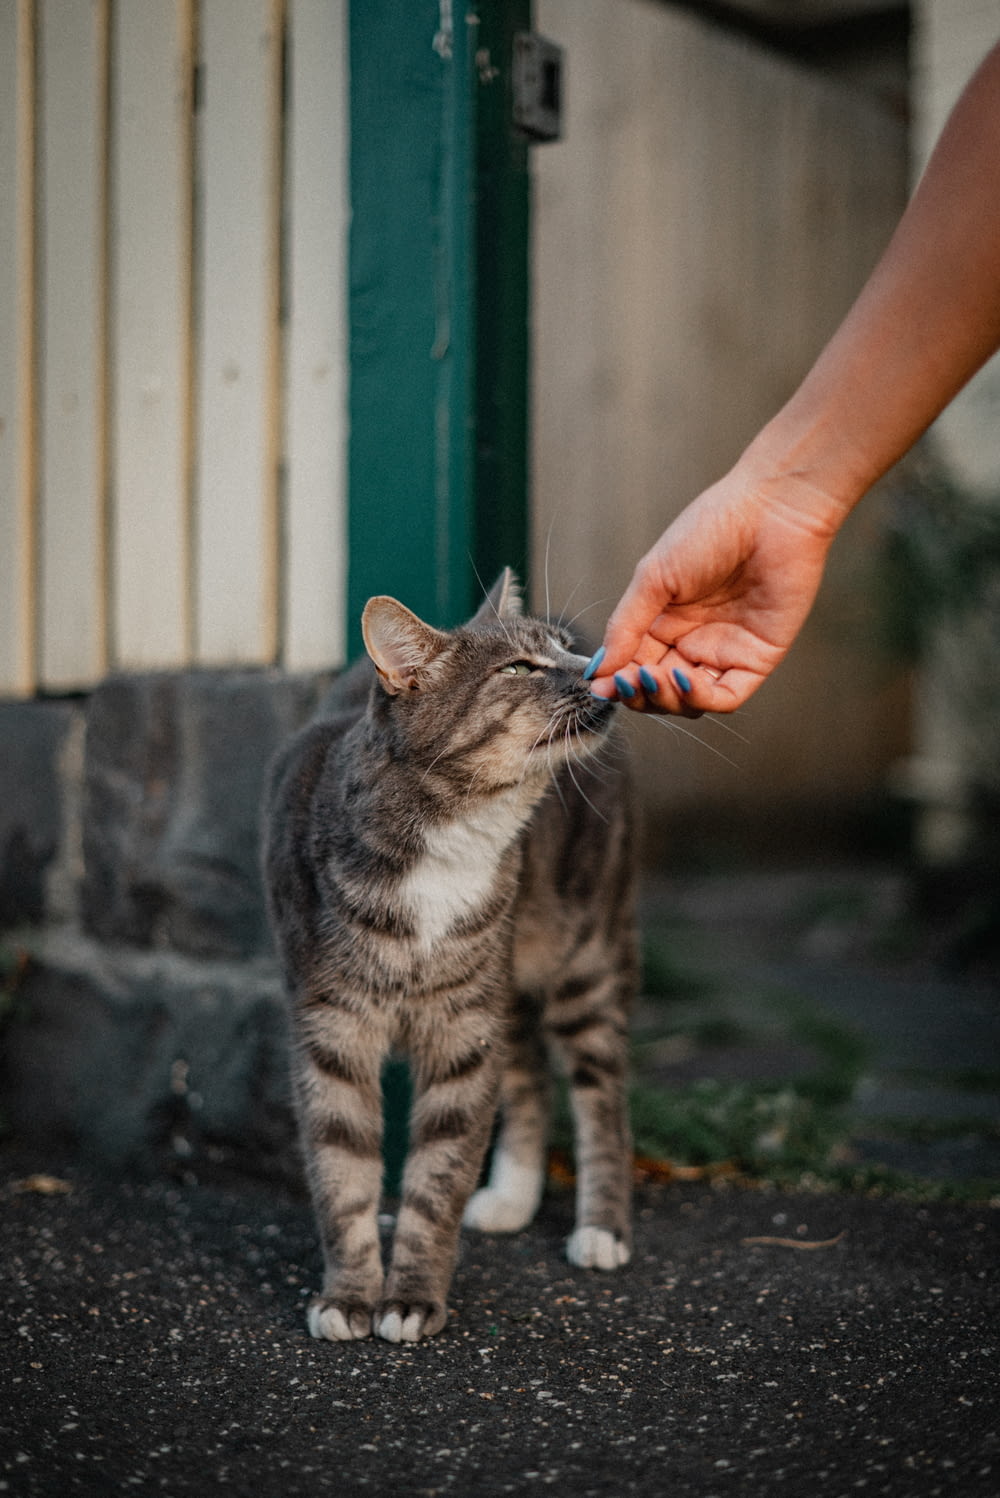 a person feeding a cat with a toothbrush